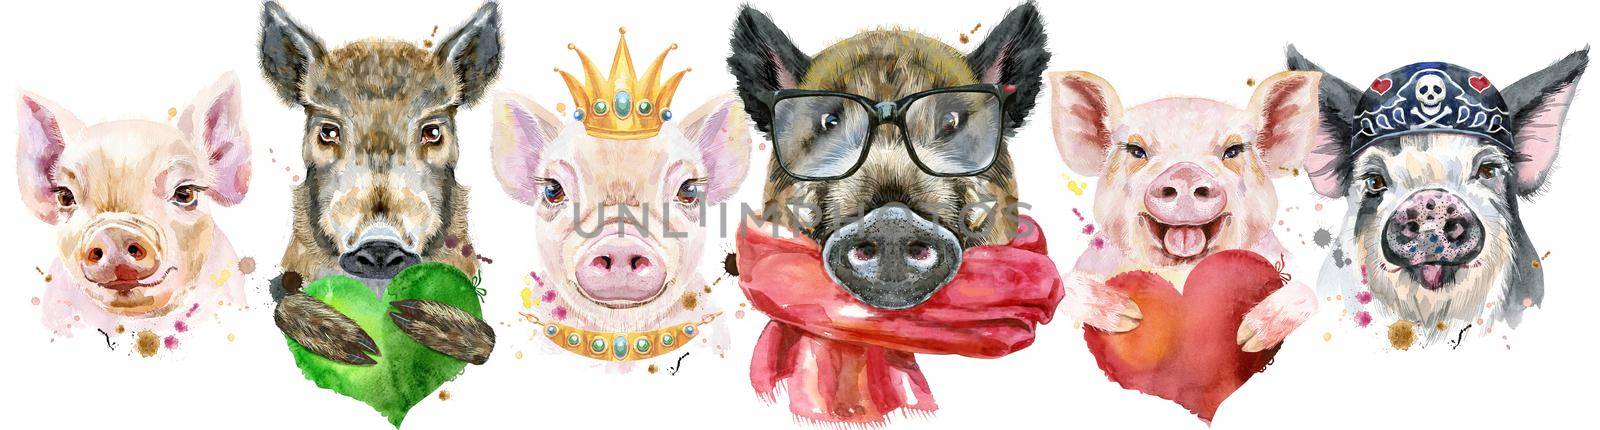 Cute border from watercolor portraits of pigs.